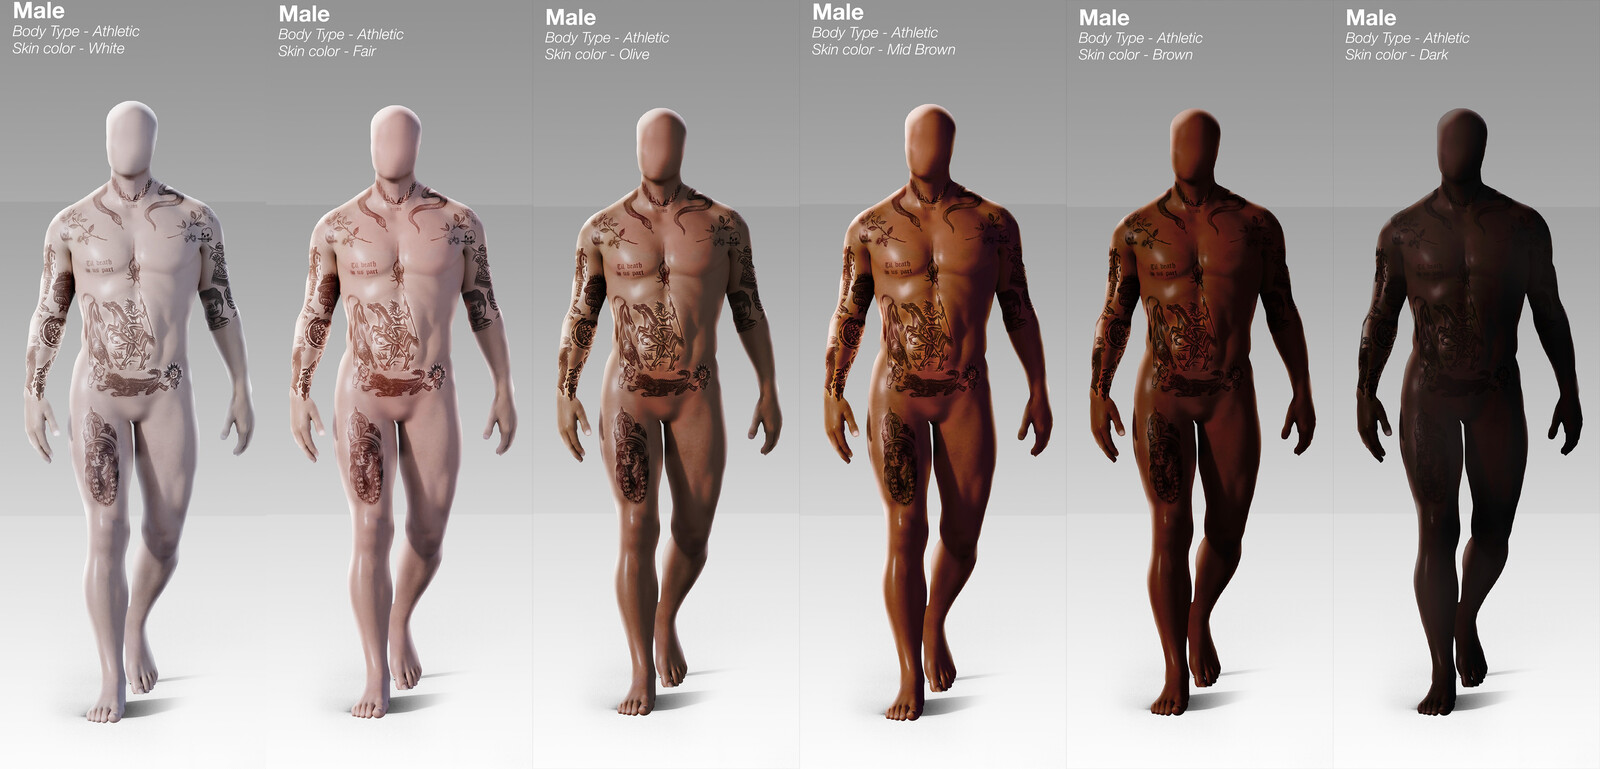 We envisioned this as a really inclusive game, so we applied the Fitzpatrick skin type scale so we can have all the representation on color besides also having all the bodytypes.